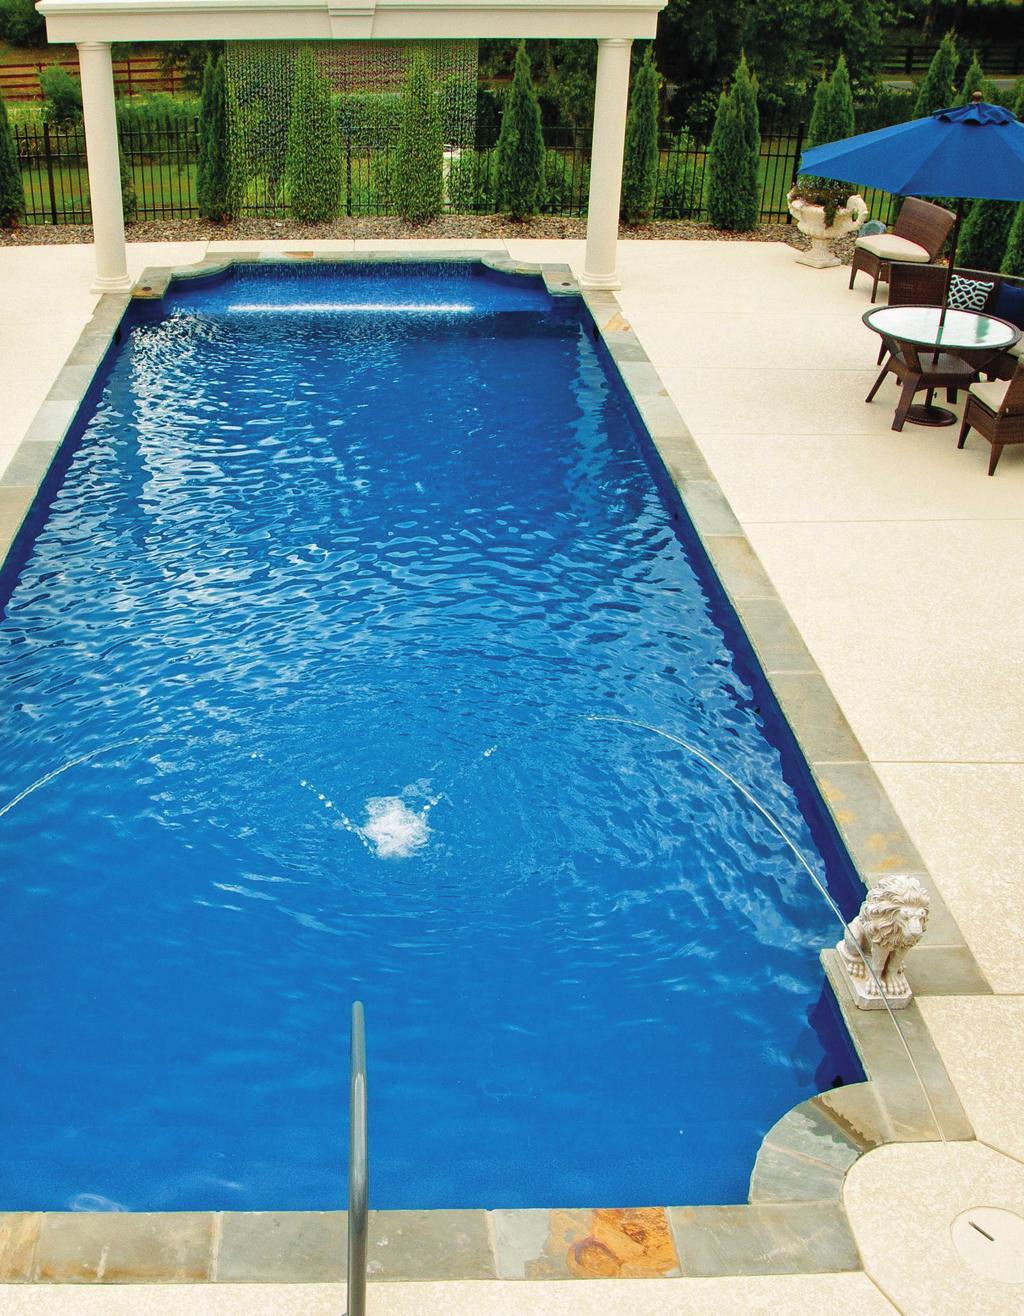 Myth #7: Fiberglass pools are not environmentally friendly. ONCE MORE, THIS IS FALSE.